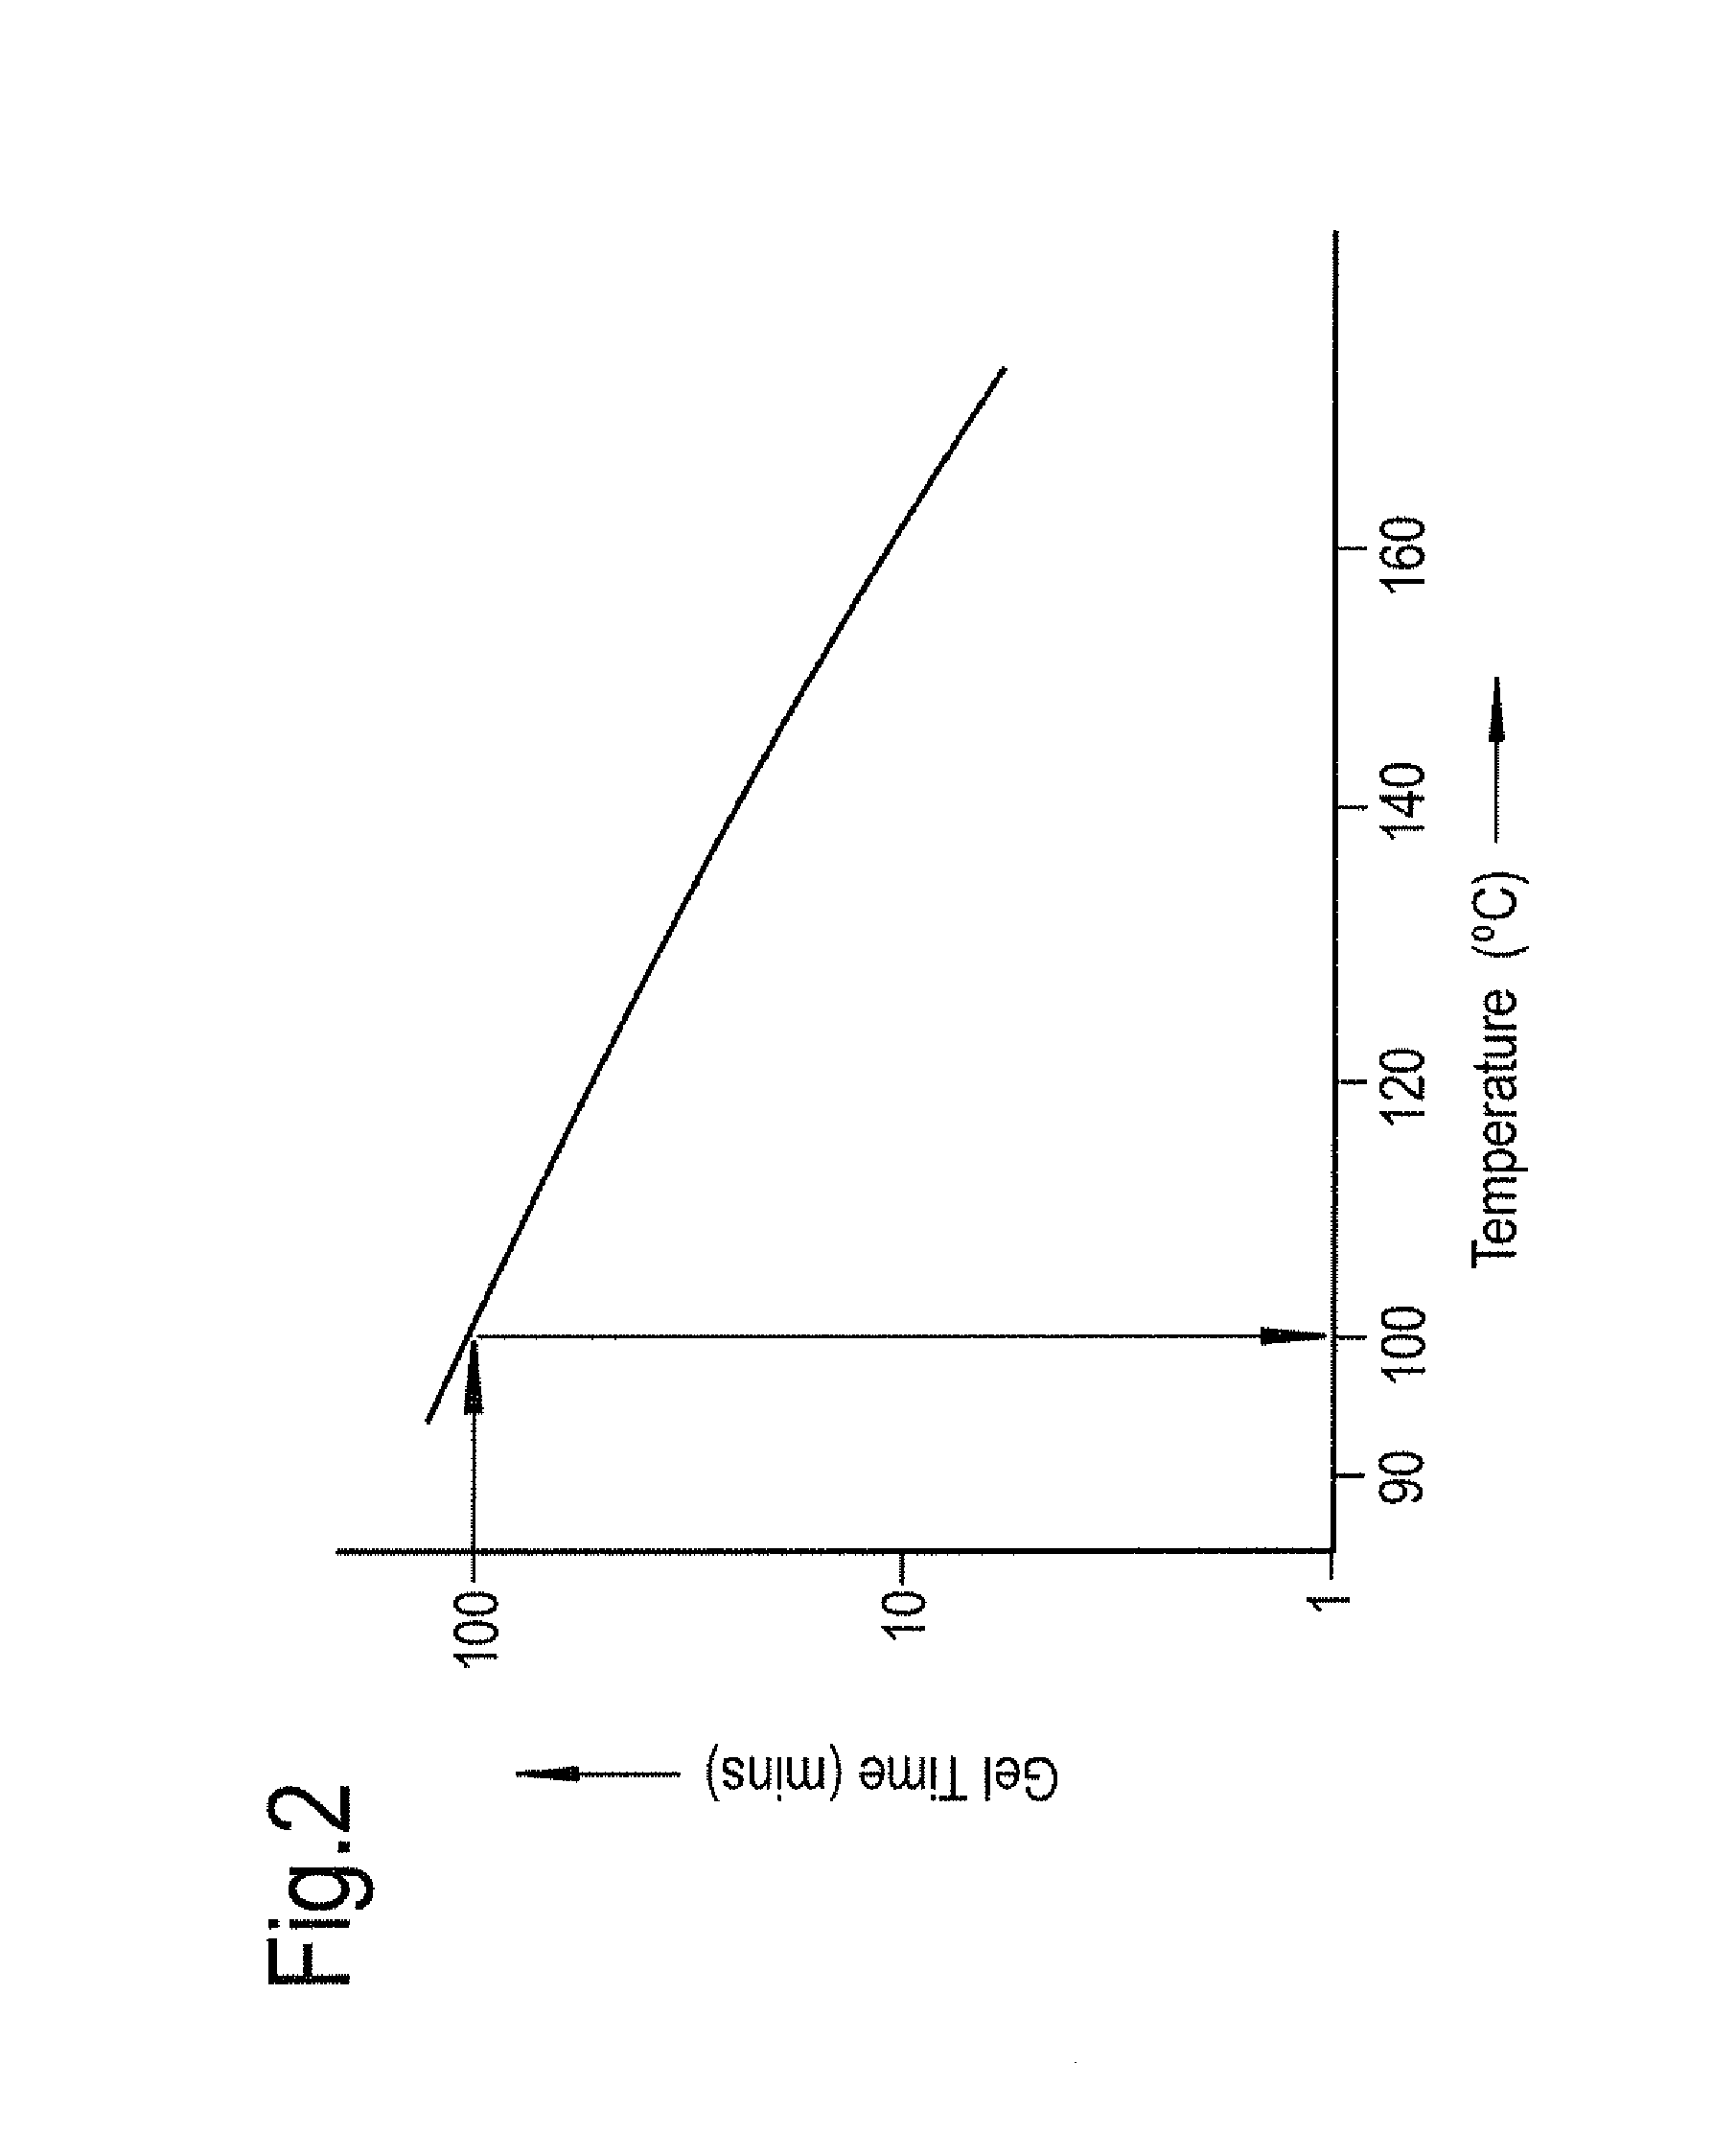 Method of providing through-thickness reinforcement of a laminated material